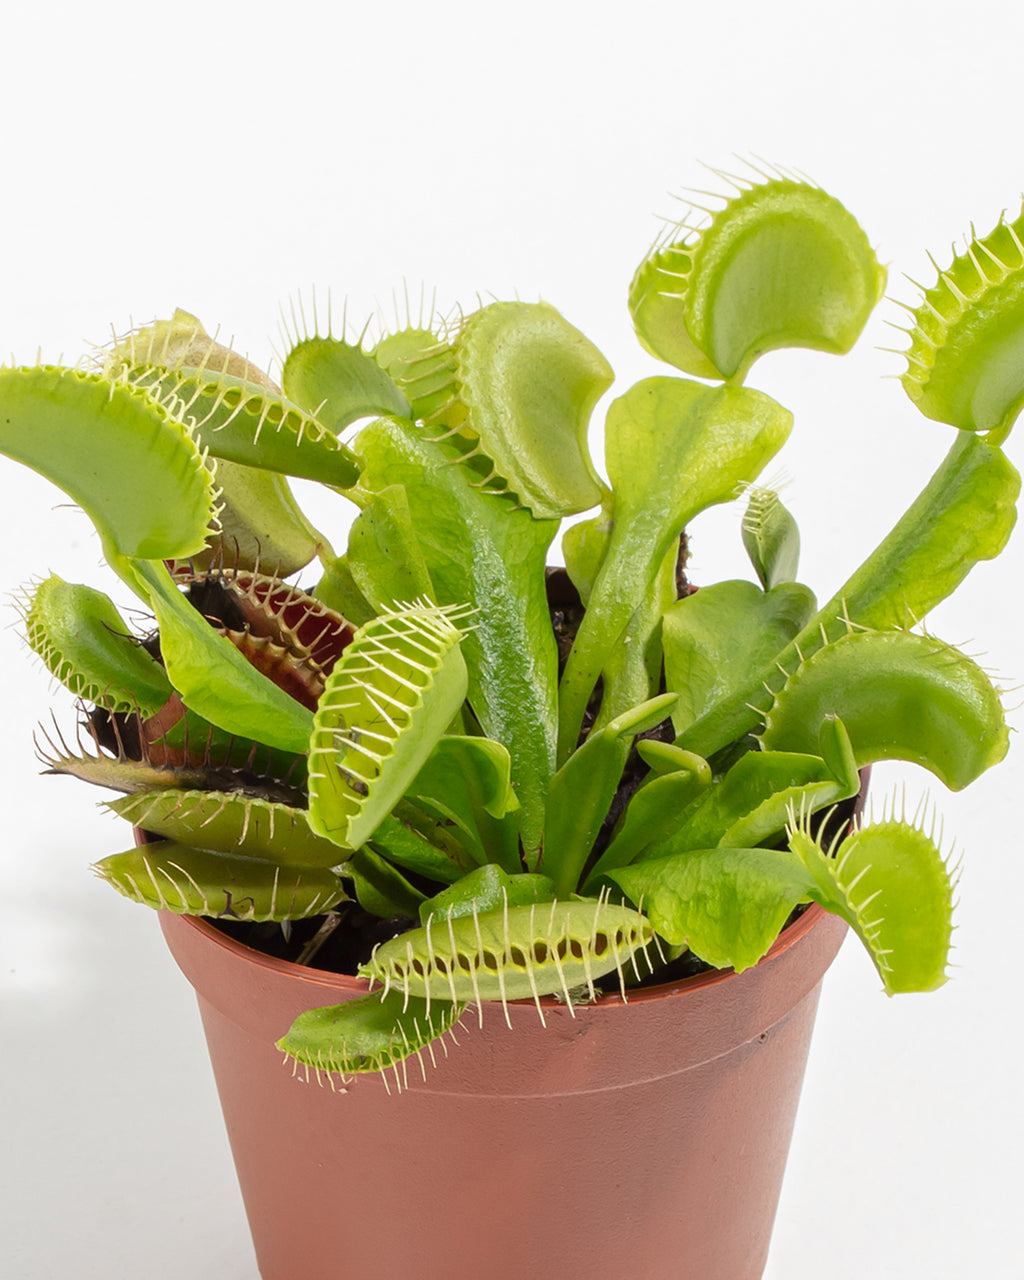 Keep Your Venus Fly Trap Alive: Light, Water & Care Instructions